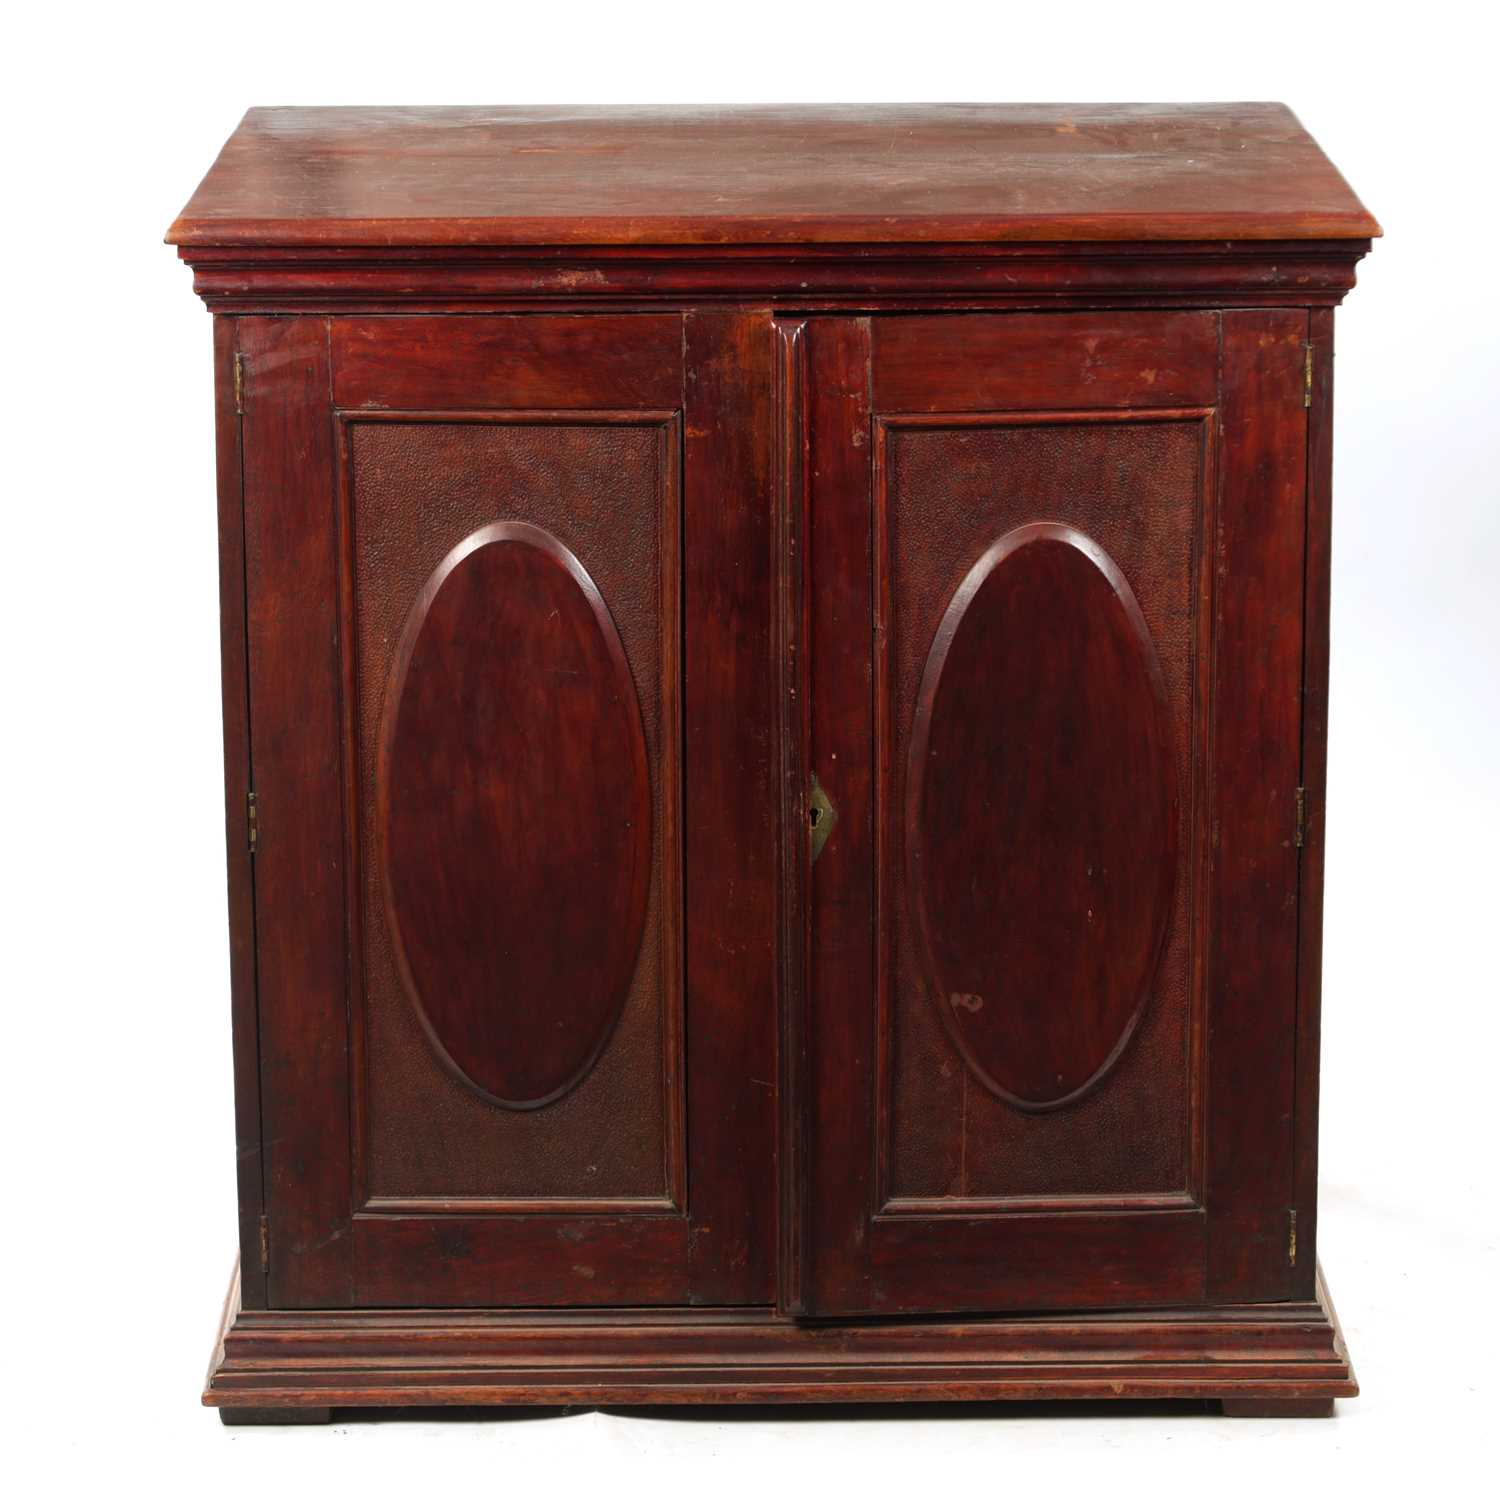 A LATE 19TH CENTURY SCUMBLED PINE COLLECTORS CABINET